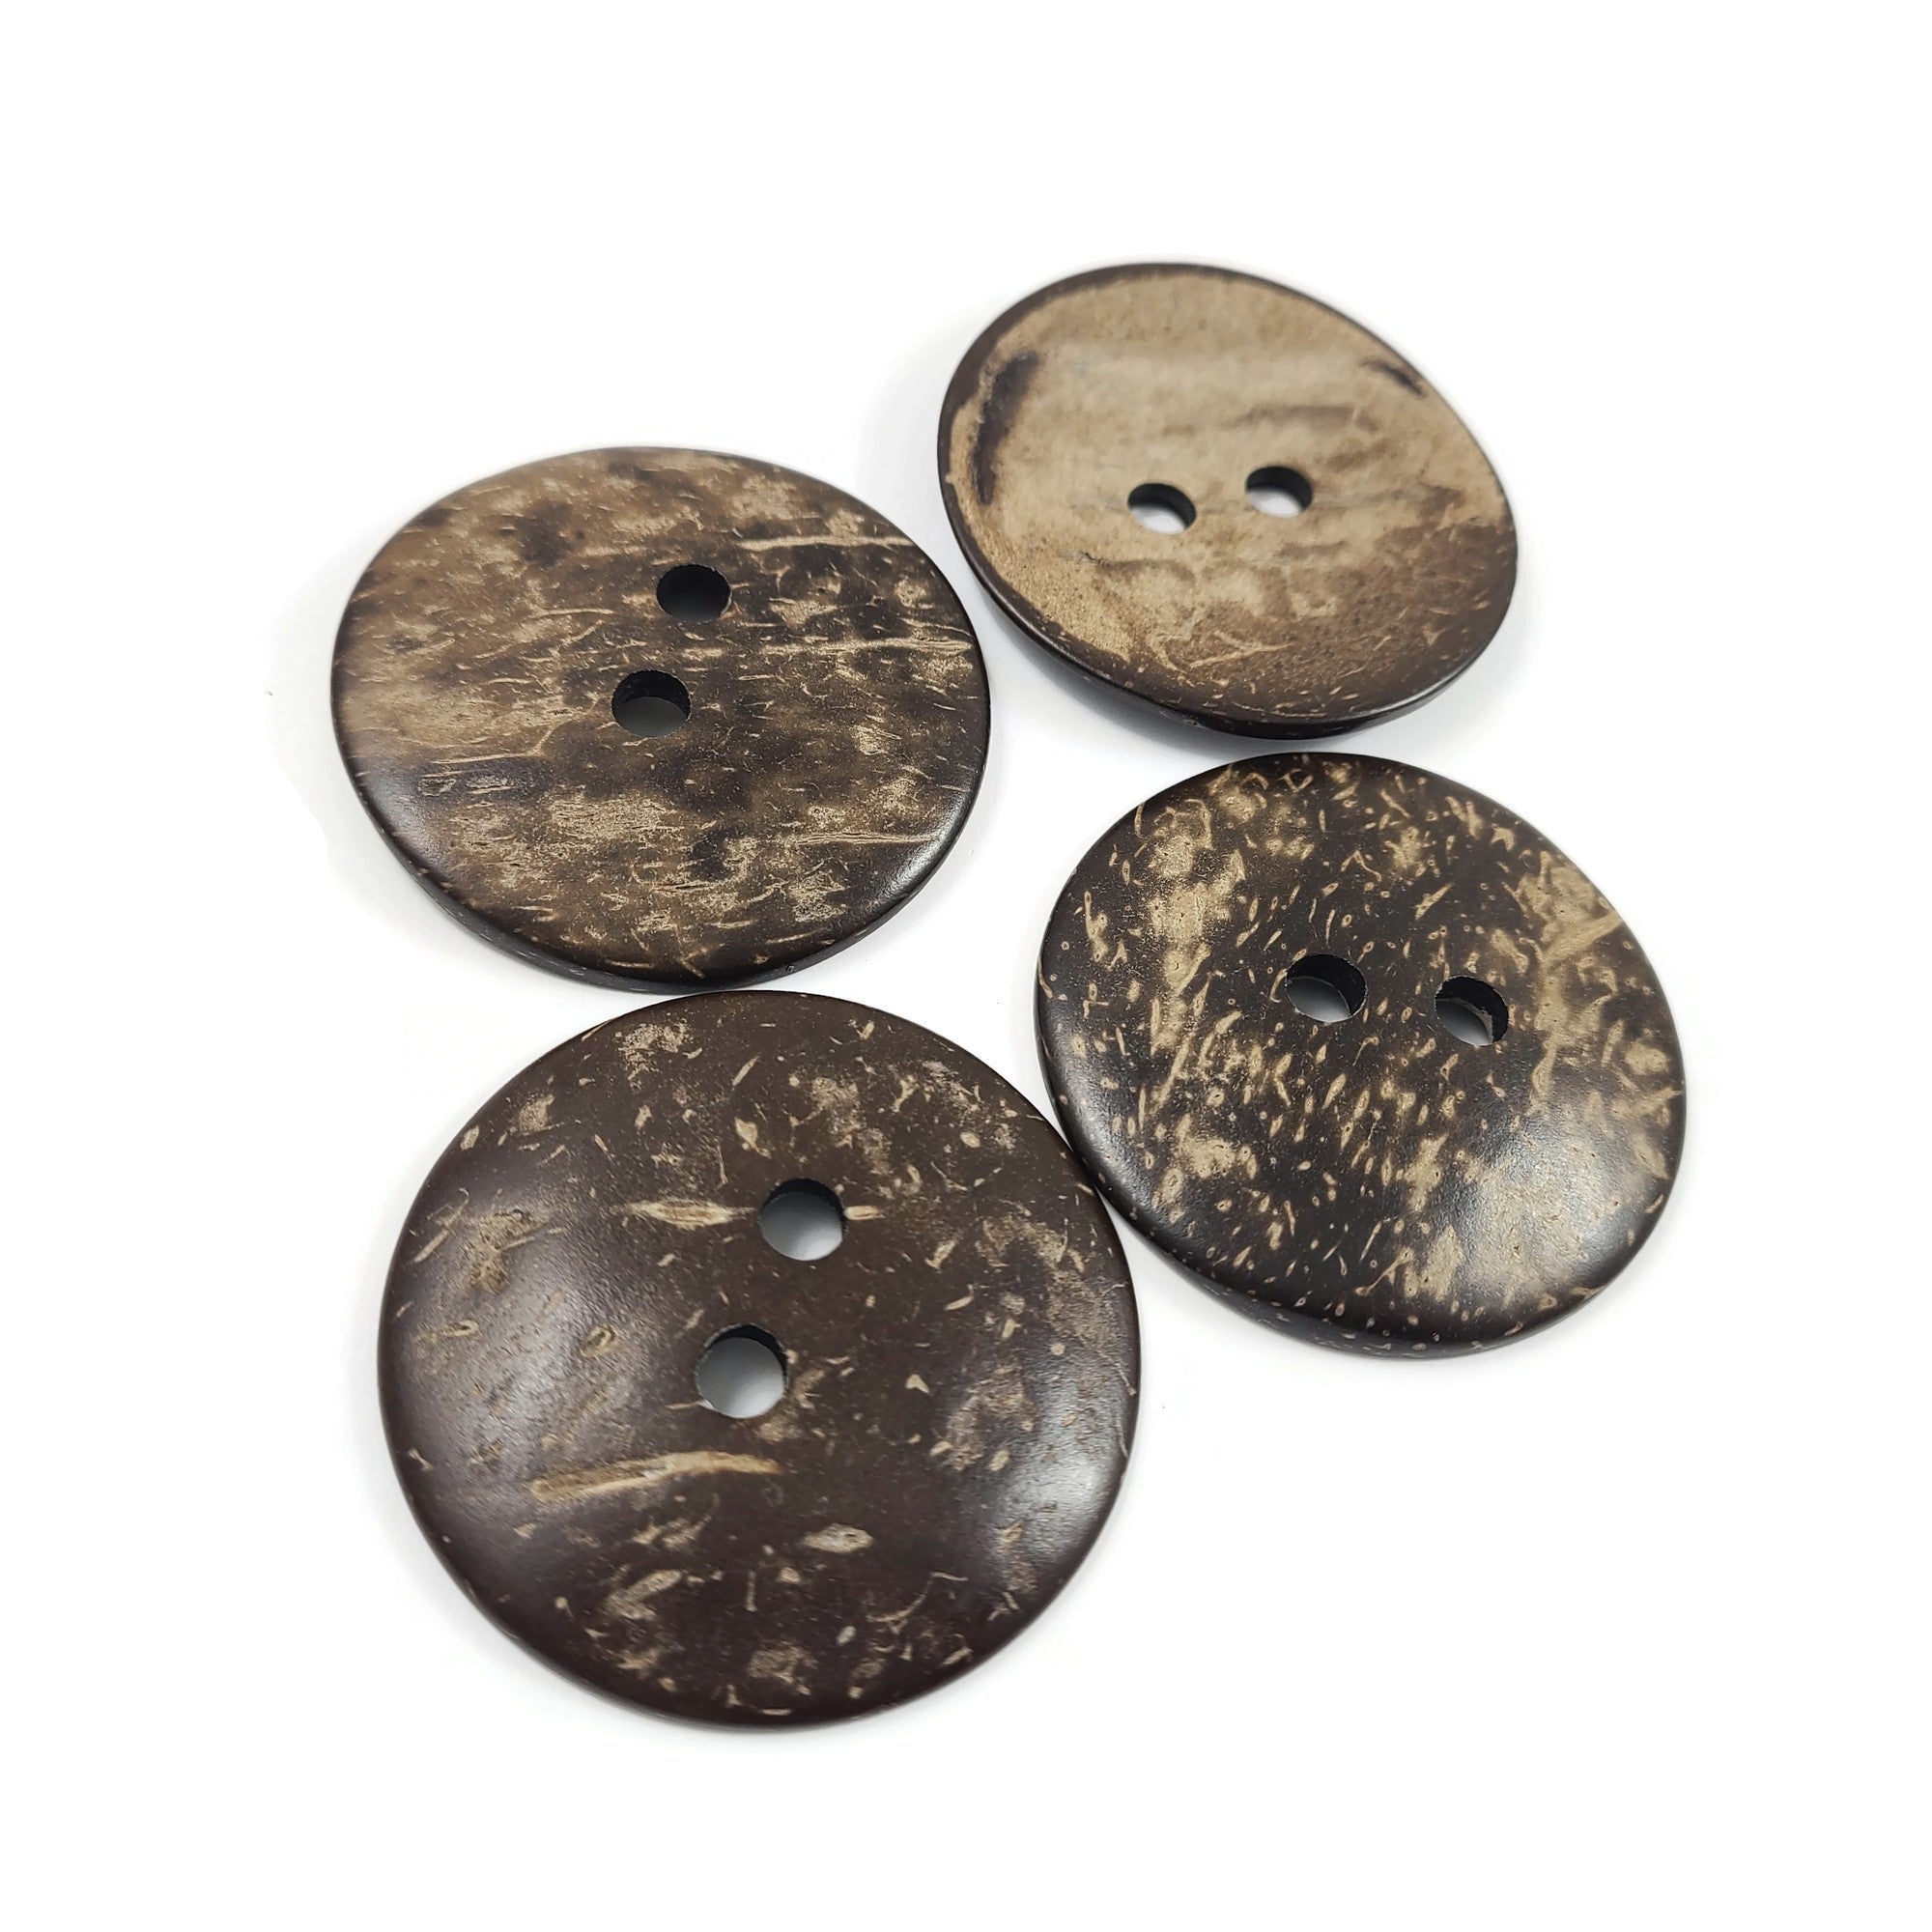 2 Large buttons 1 3/4 inch coconut buttons 44mm - Natural Wood and Eco Friendly buttons